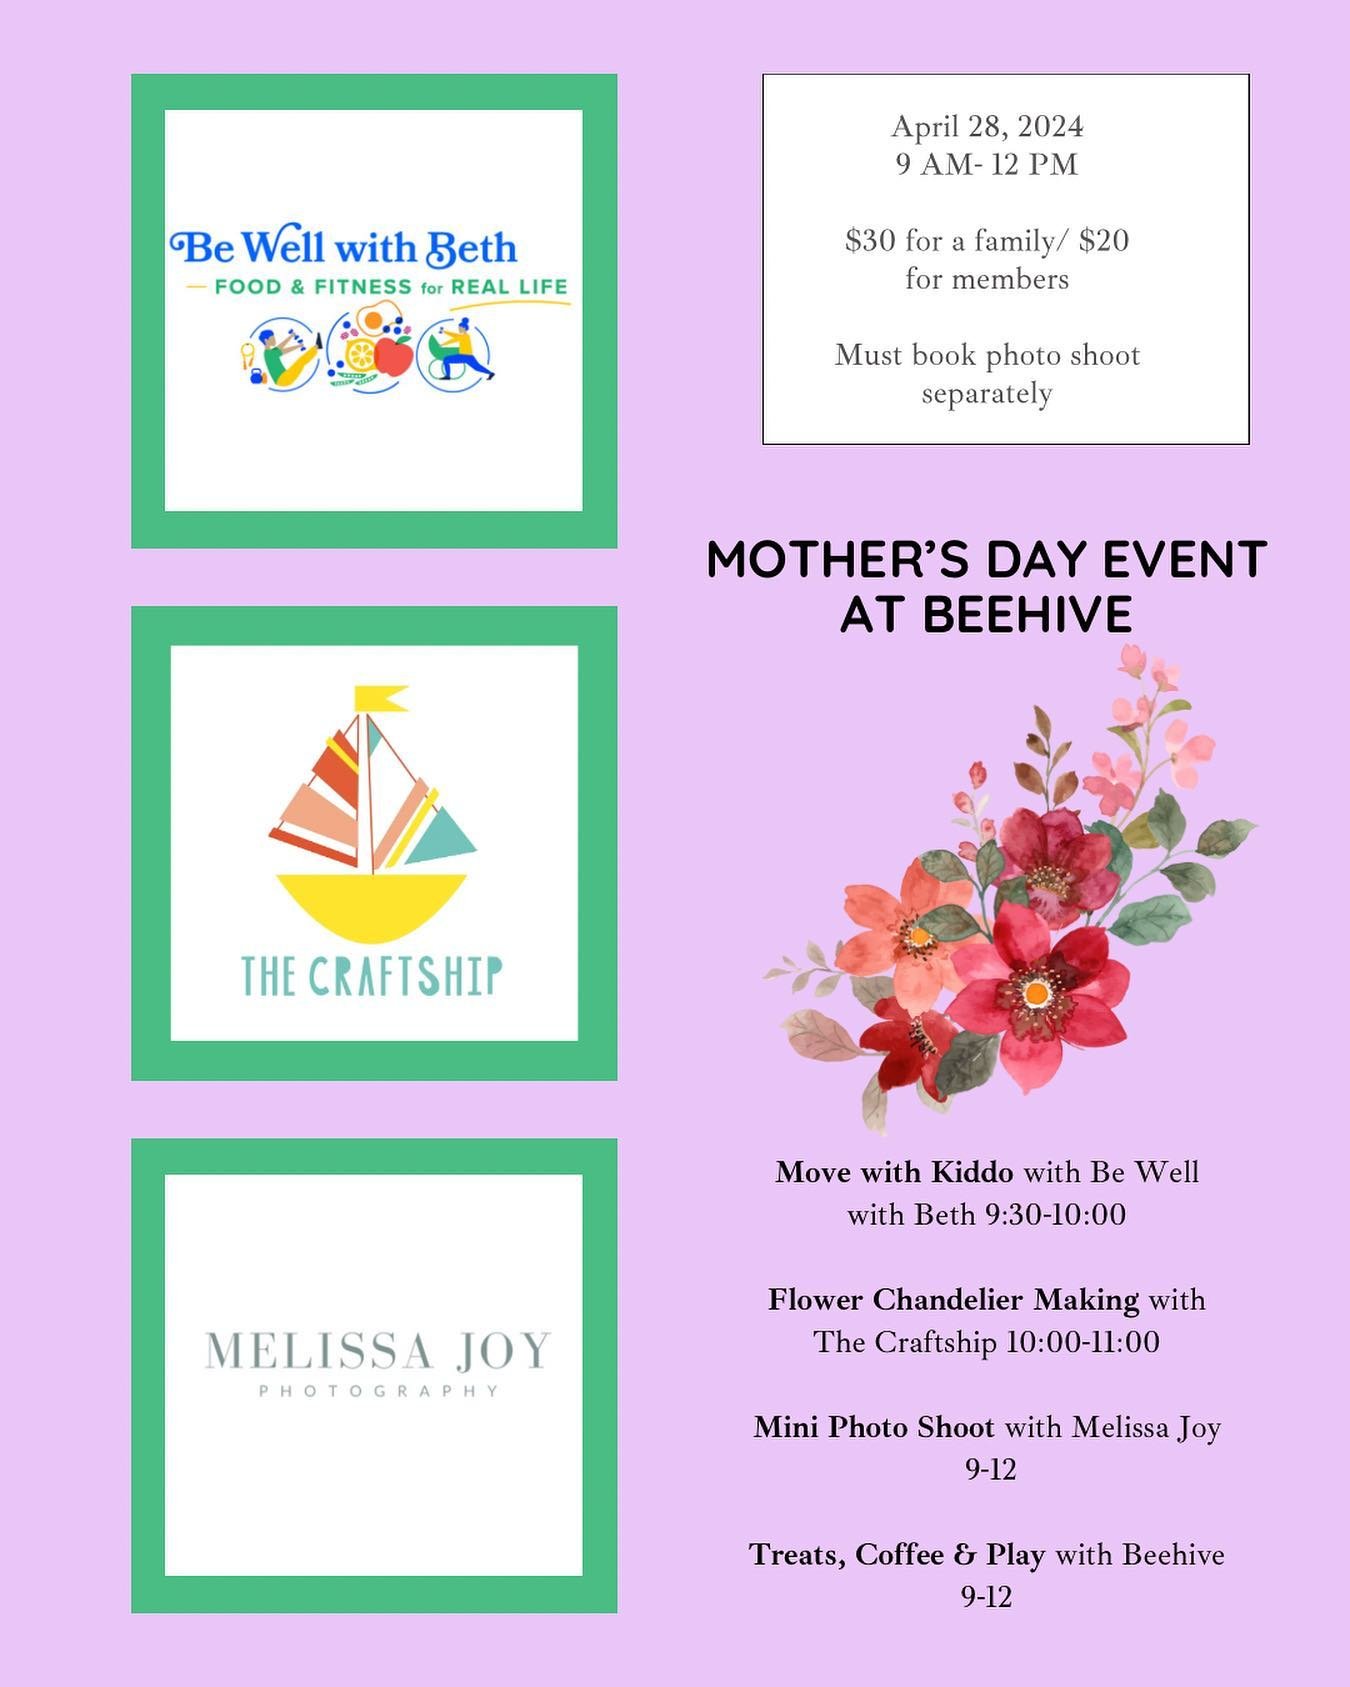 💐 💐 💐 Mother&rsquo;s Day at Beehive 💐 💐 💐 

Join @melissajoy.photography @bewellwithbeth @the.craftship &amp; @beehivecommunity for a collaborative Mother&rsquo;s Day event! At 9:30, Beth will lead a move with kiddo workshop, followed by a spri